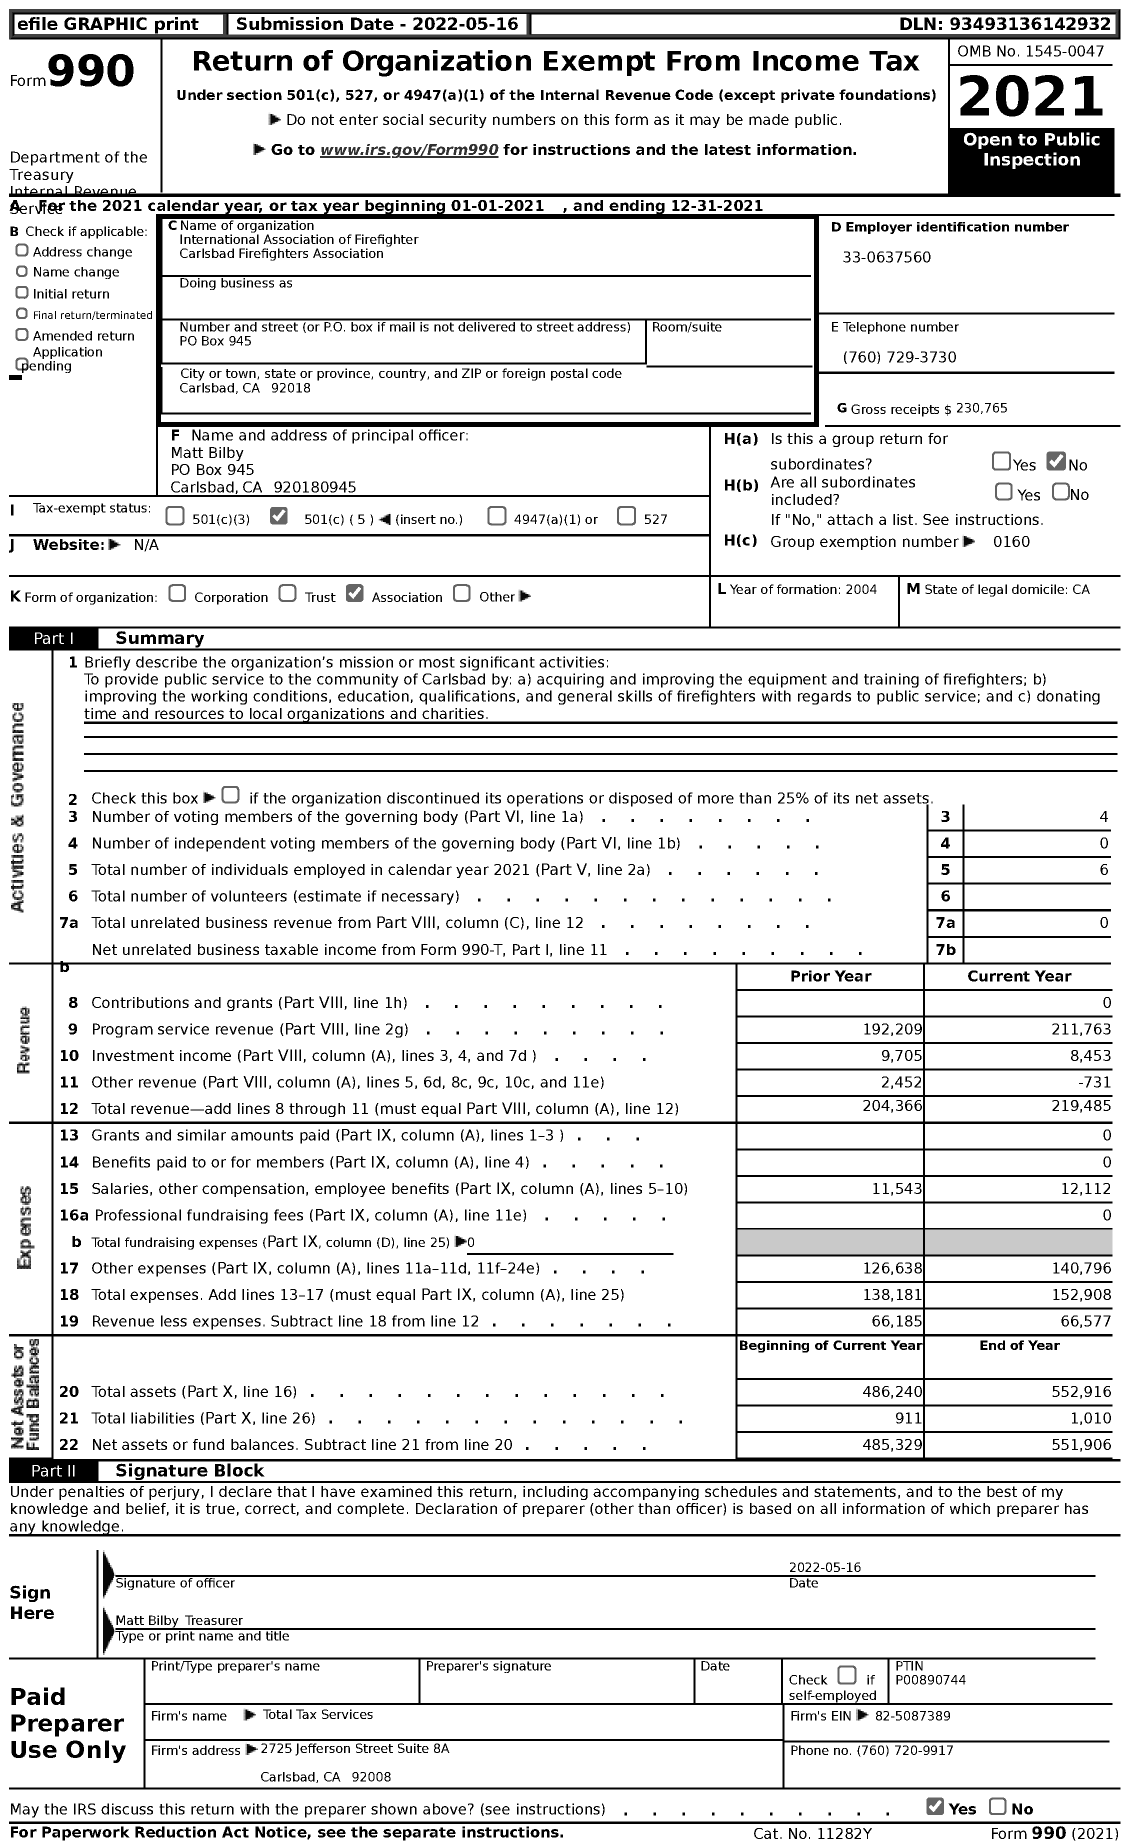 Image of first page of 2021 Form 990 for International Association of Fire Fighters - L3730 Carlsbad